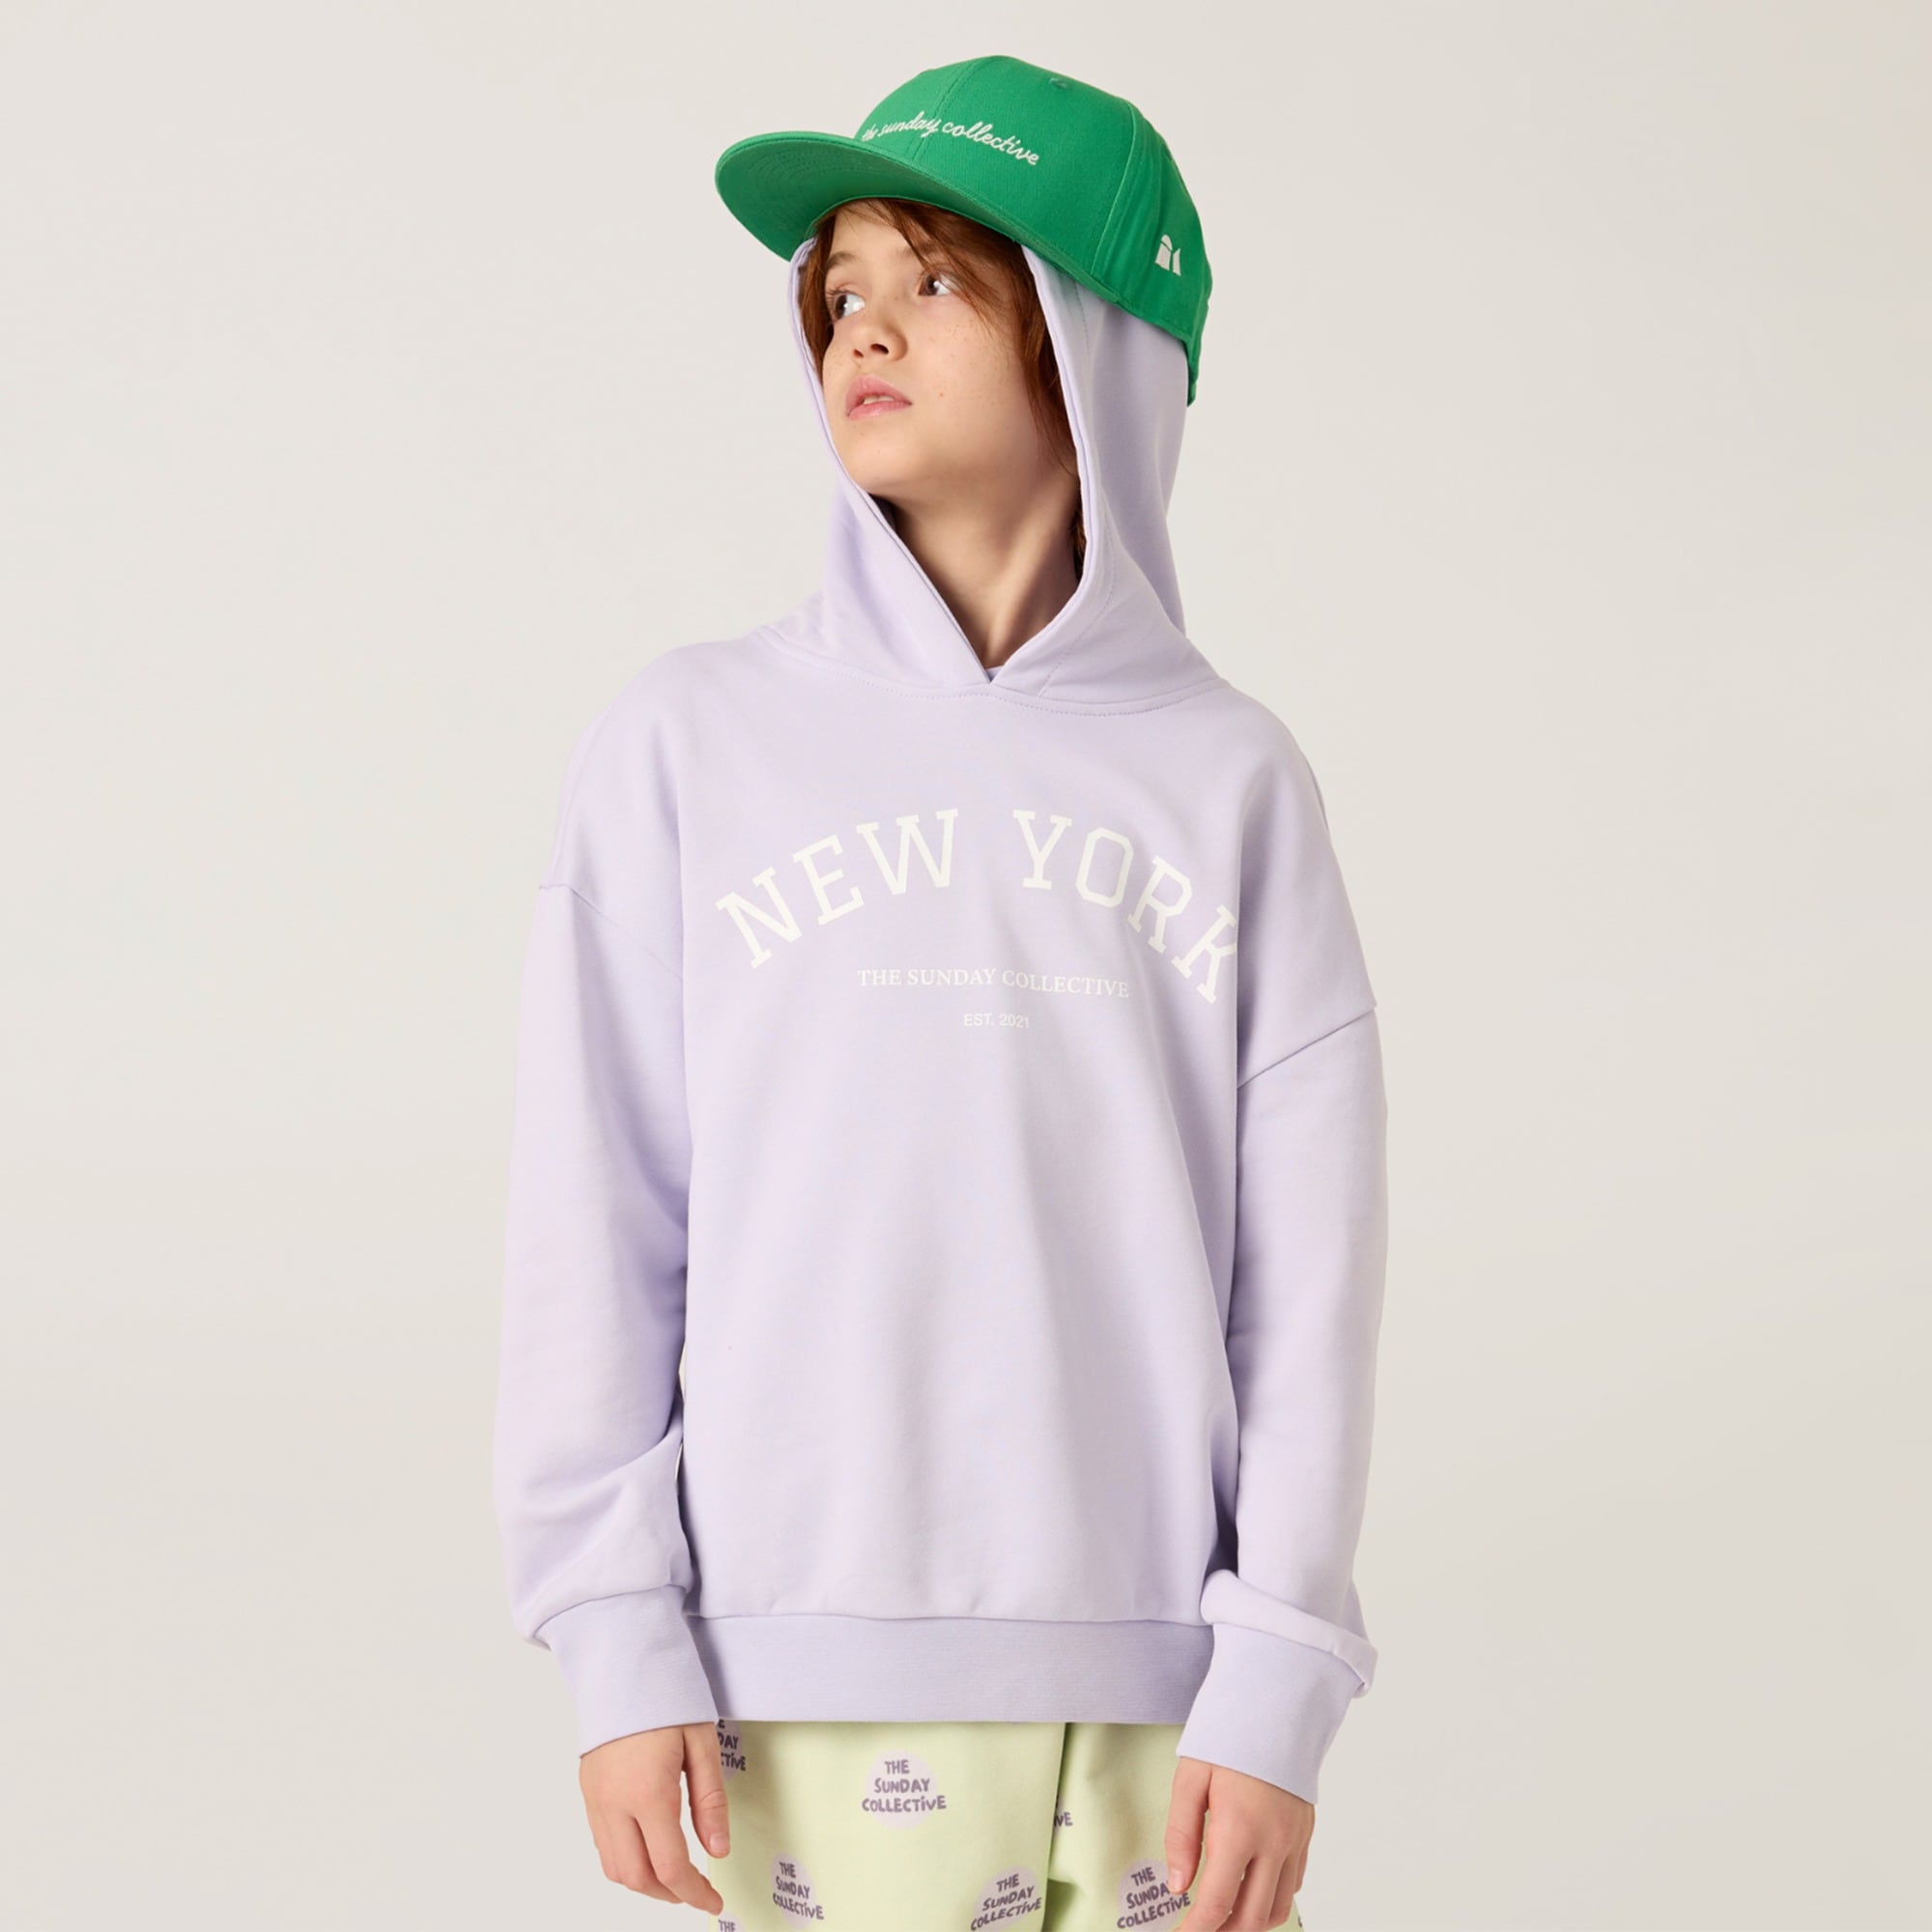 girls The Sunday Collective kids' organic cotton weekend hoodie